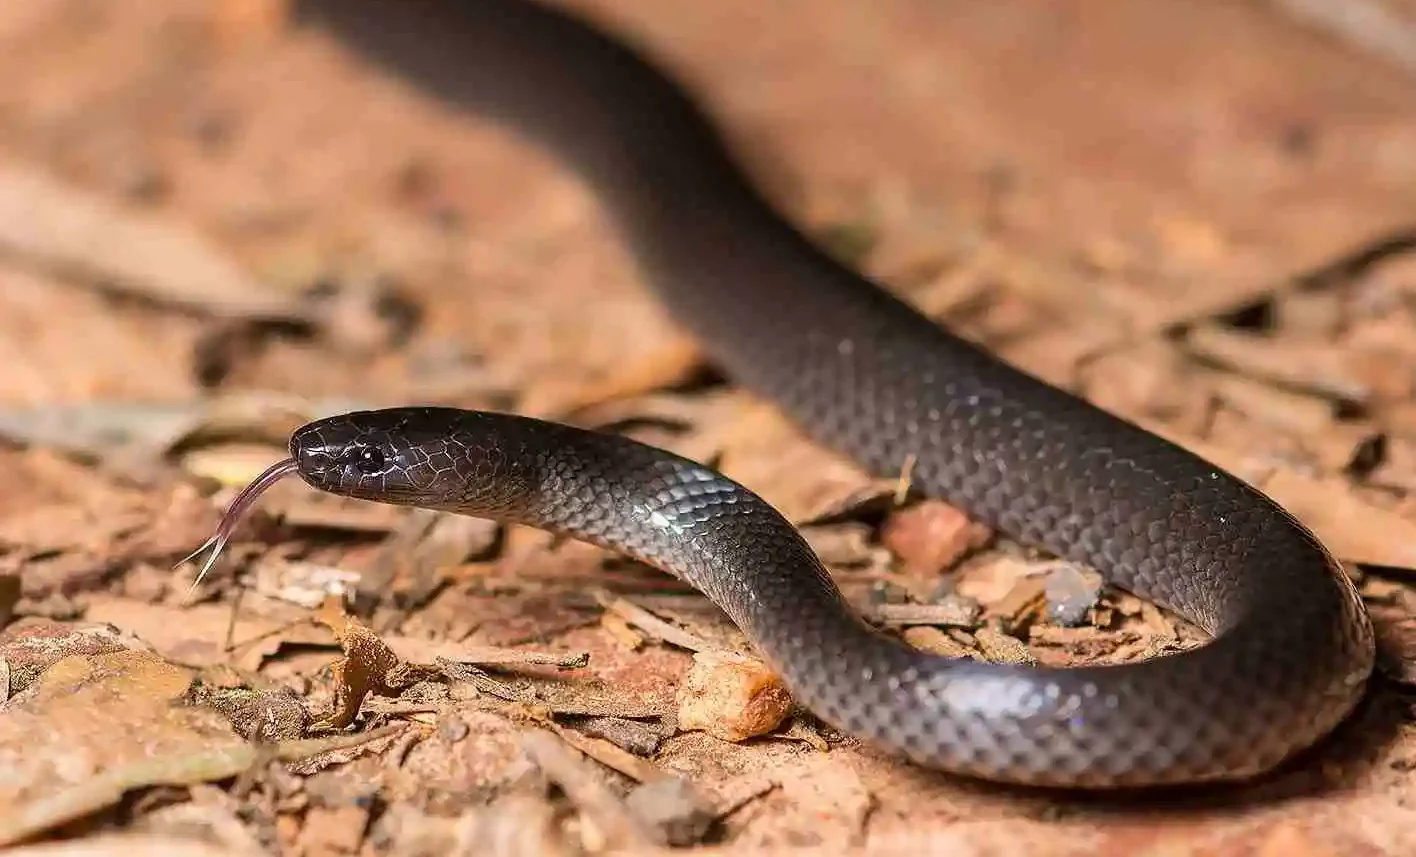 Close up of a dark brown thin scaly snake with its forked tongue out